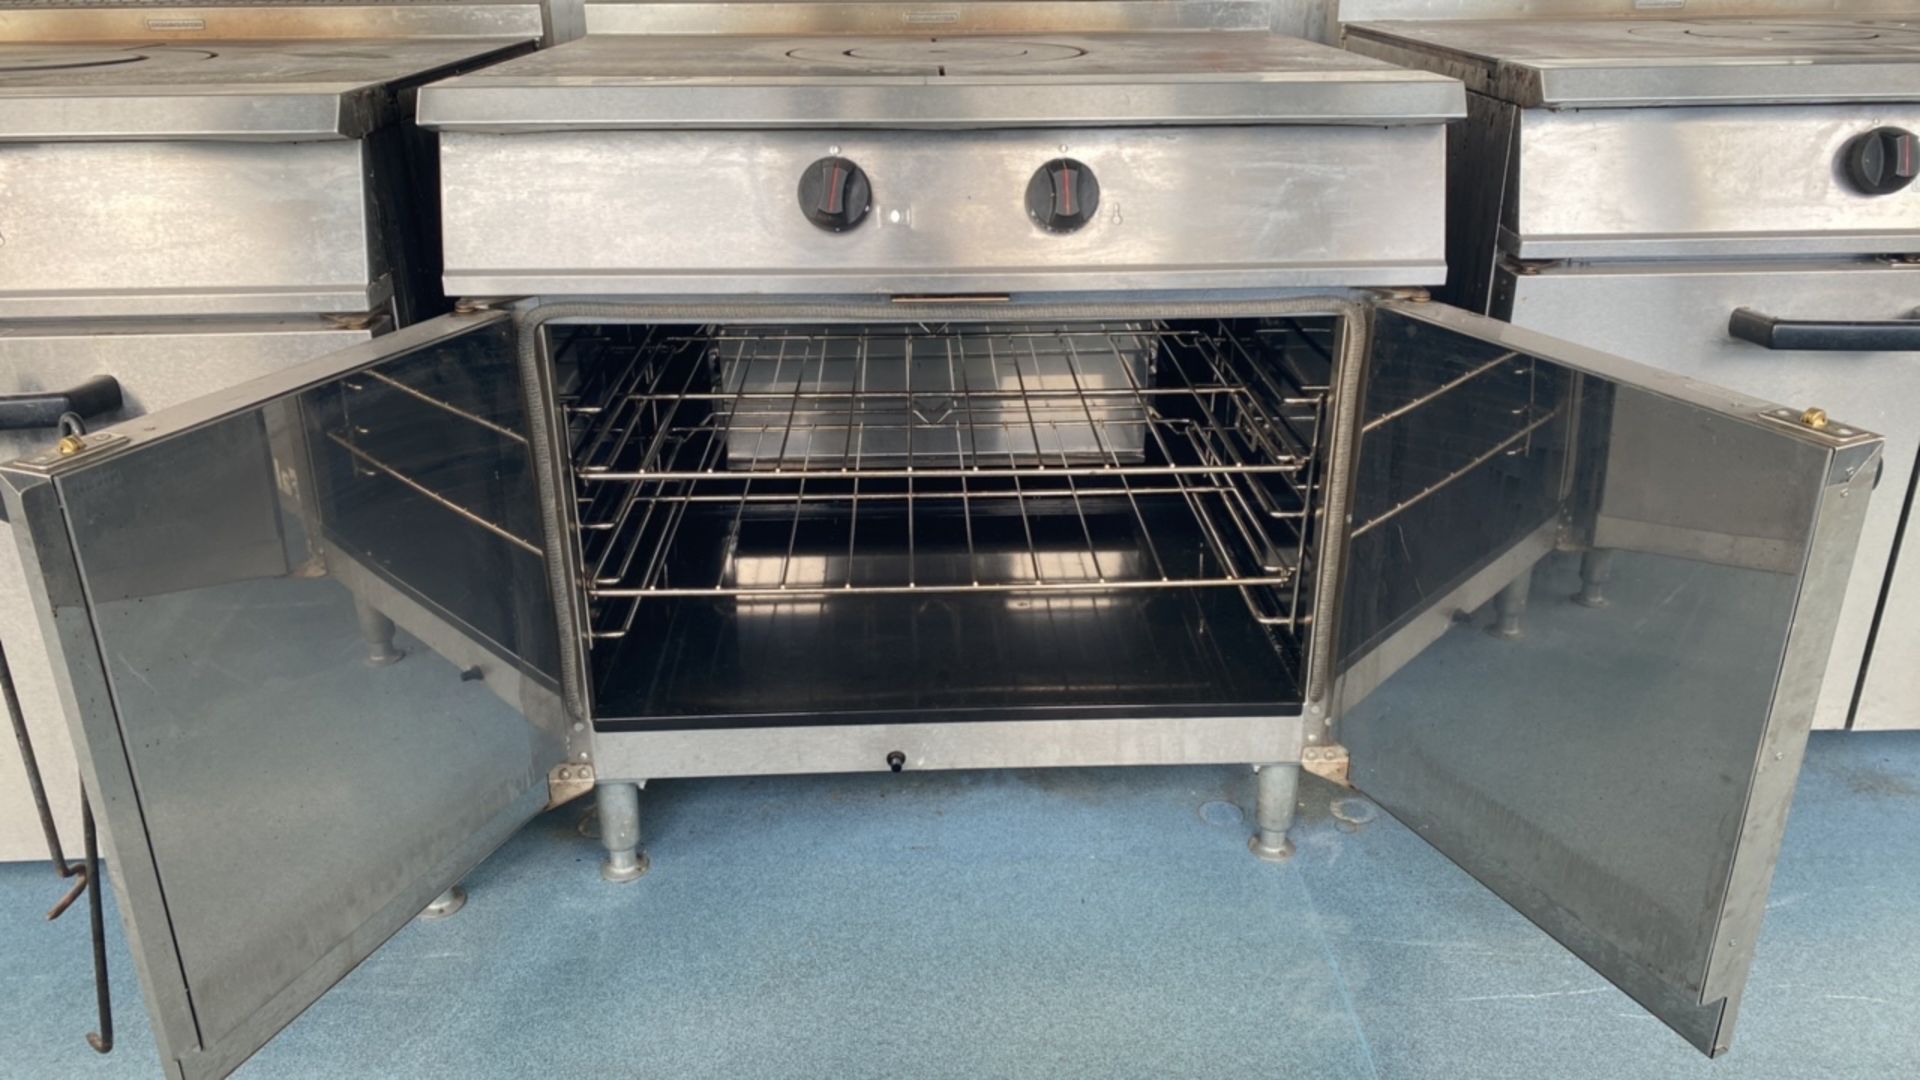 Falcon Dominator Solid Top Oven - Image 4 of 5